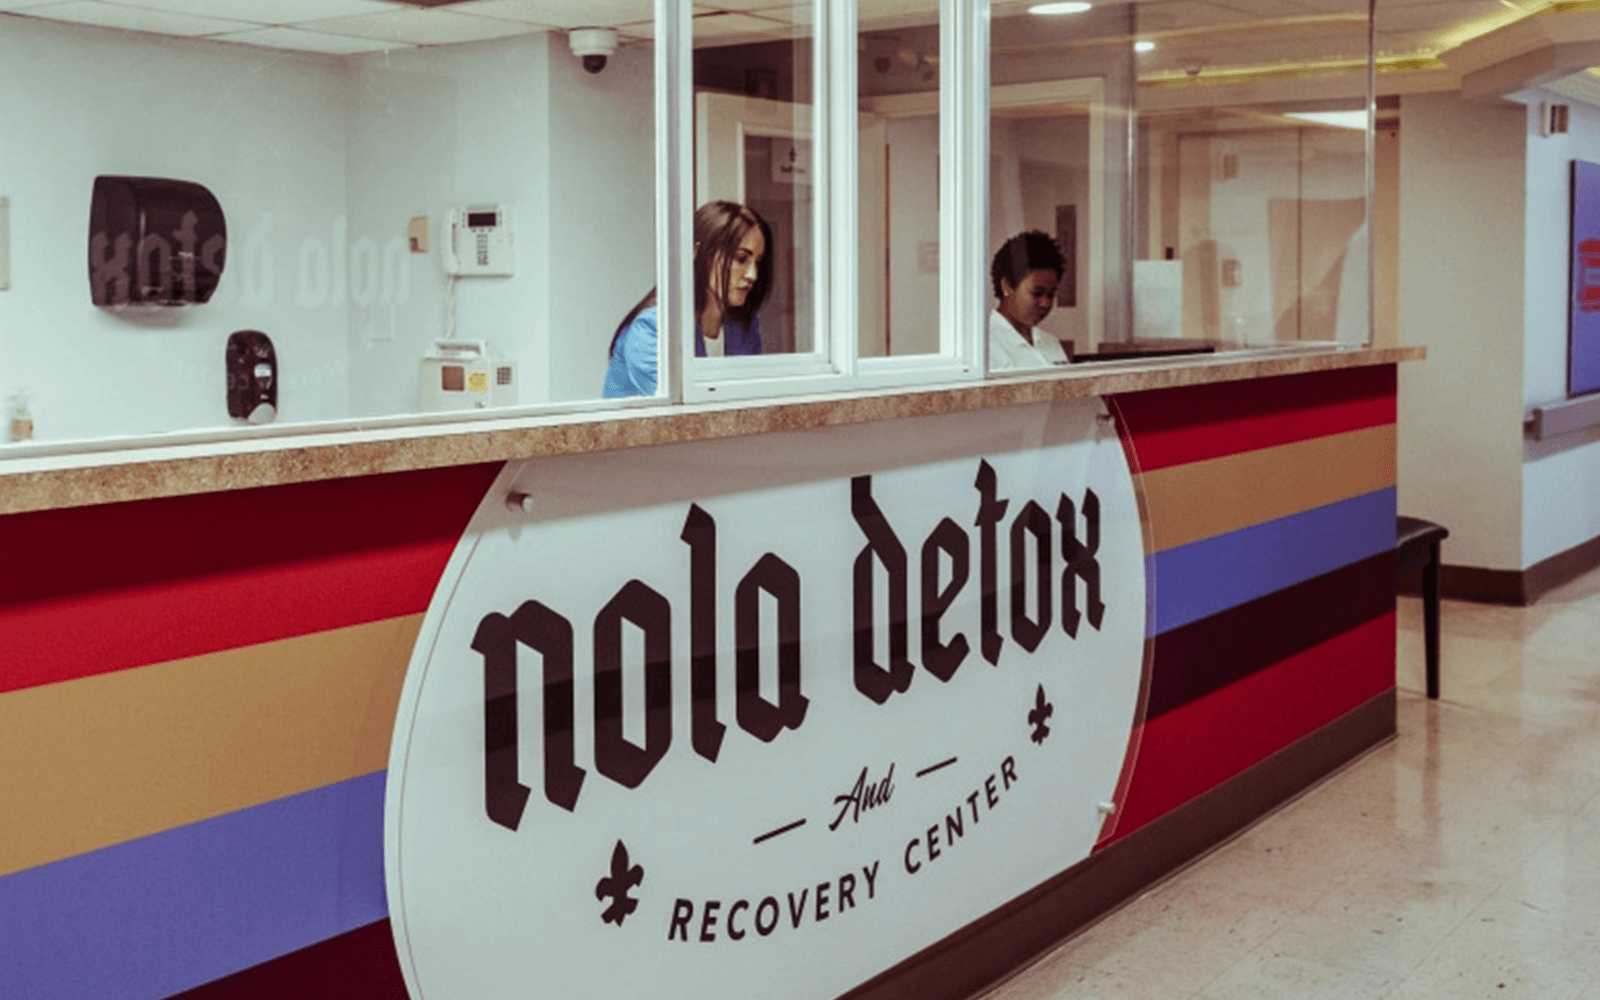 Local detox and recovery center reopens post-Ida as National Recovery Month continues - NOLA Detox and Recovery Center